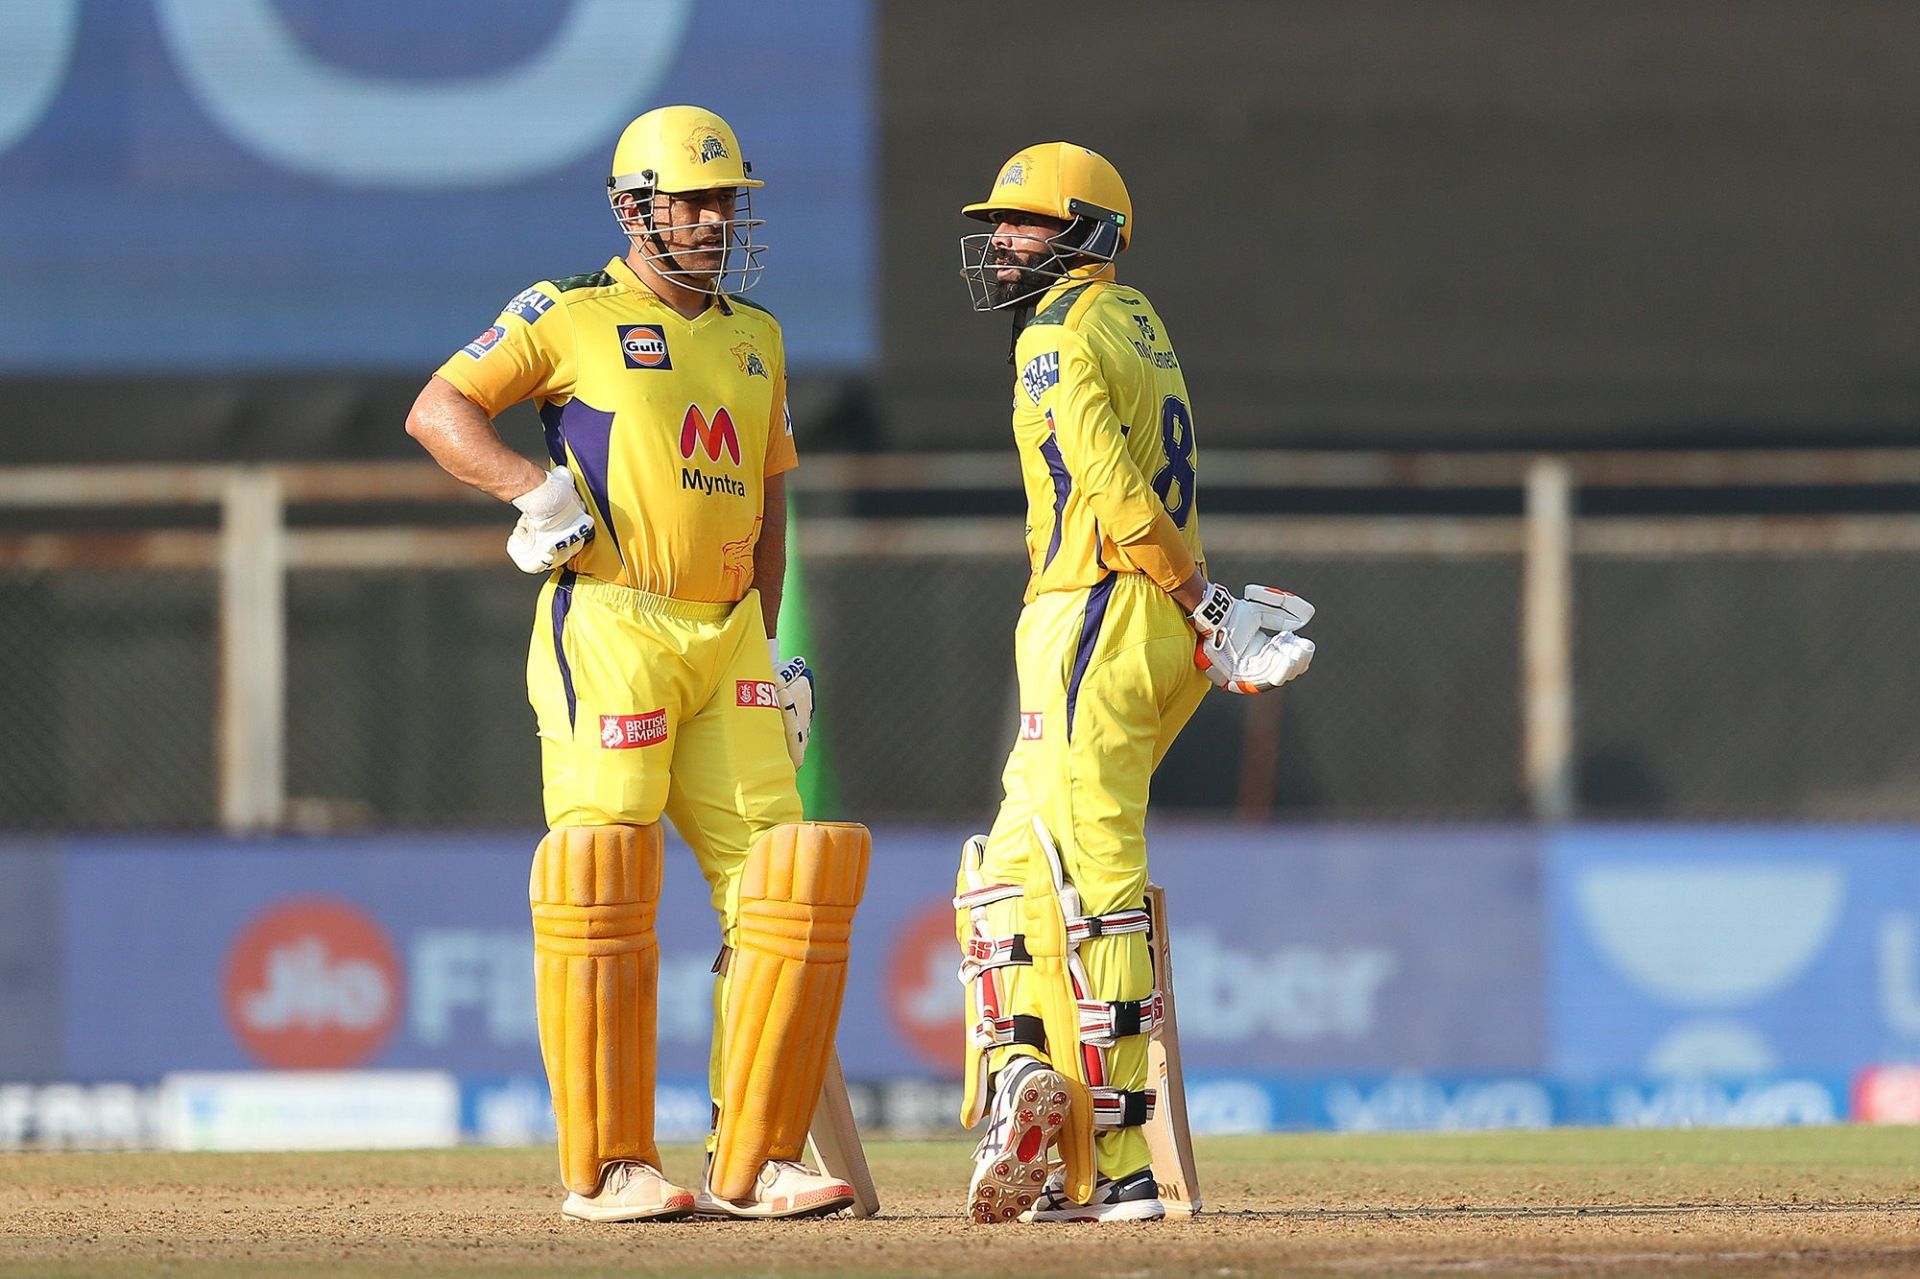  CSK placed their faith in the trusted Dhoni-Jadeja combination once again